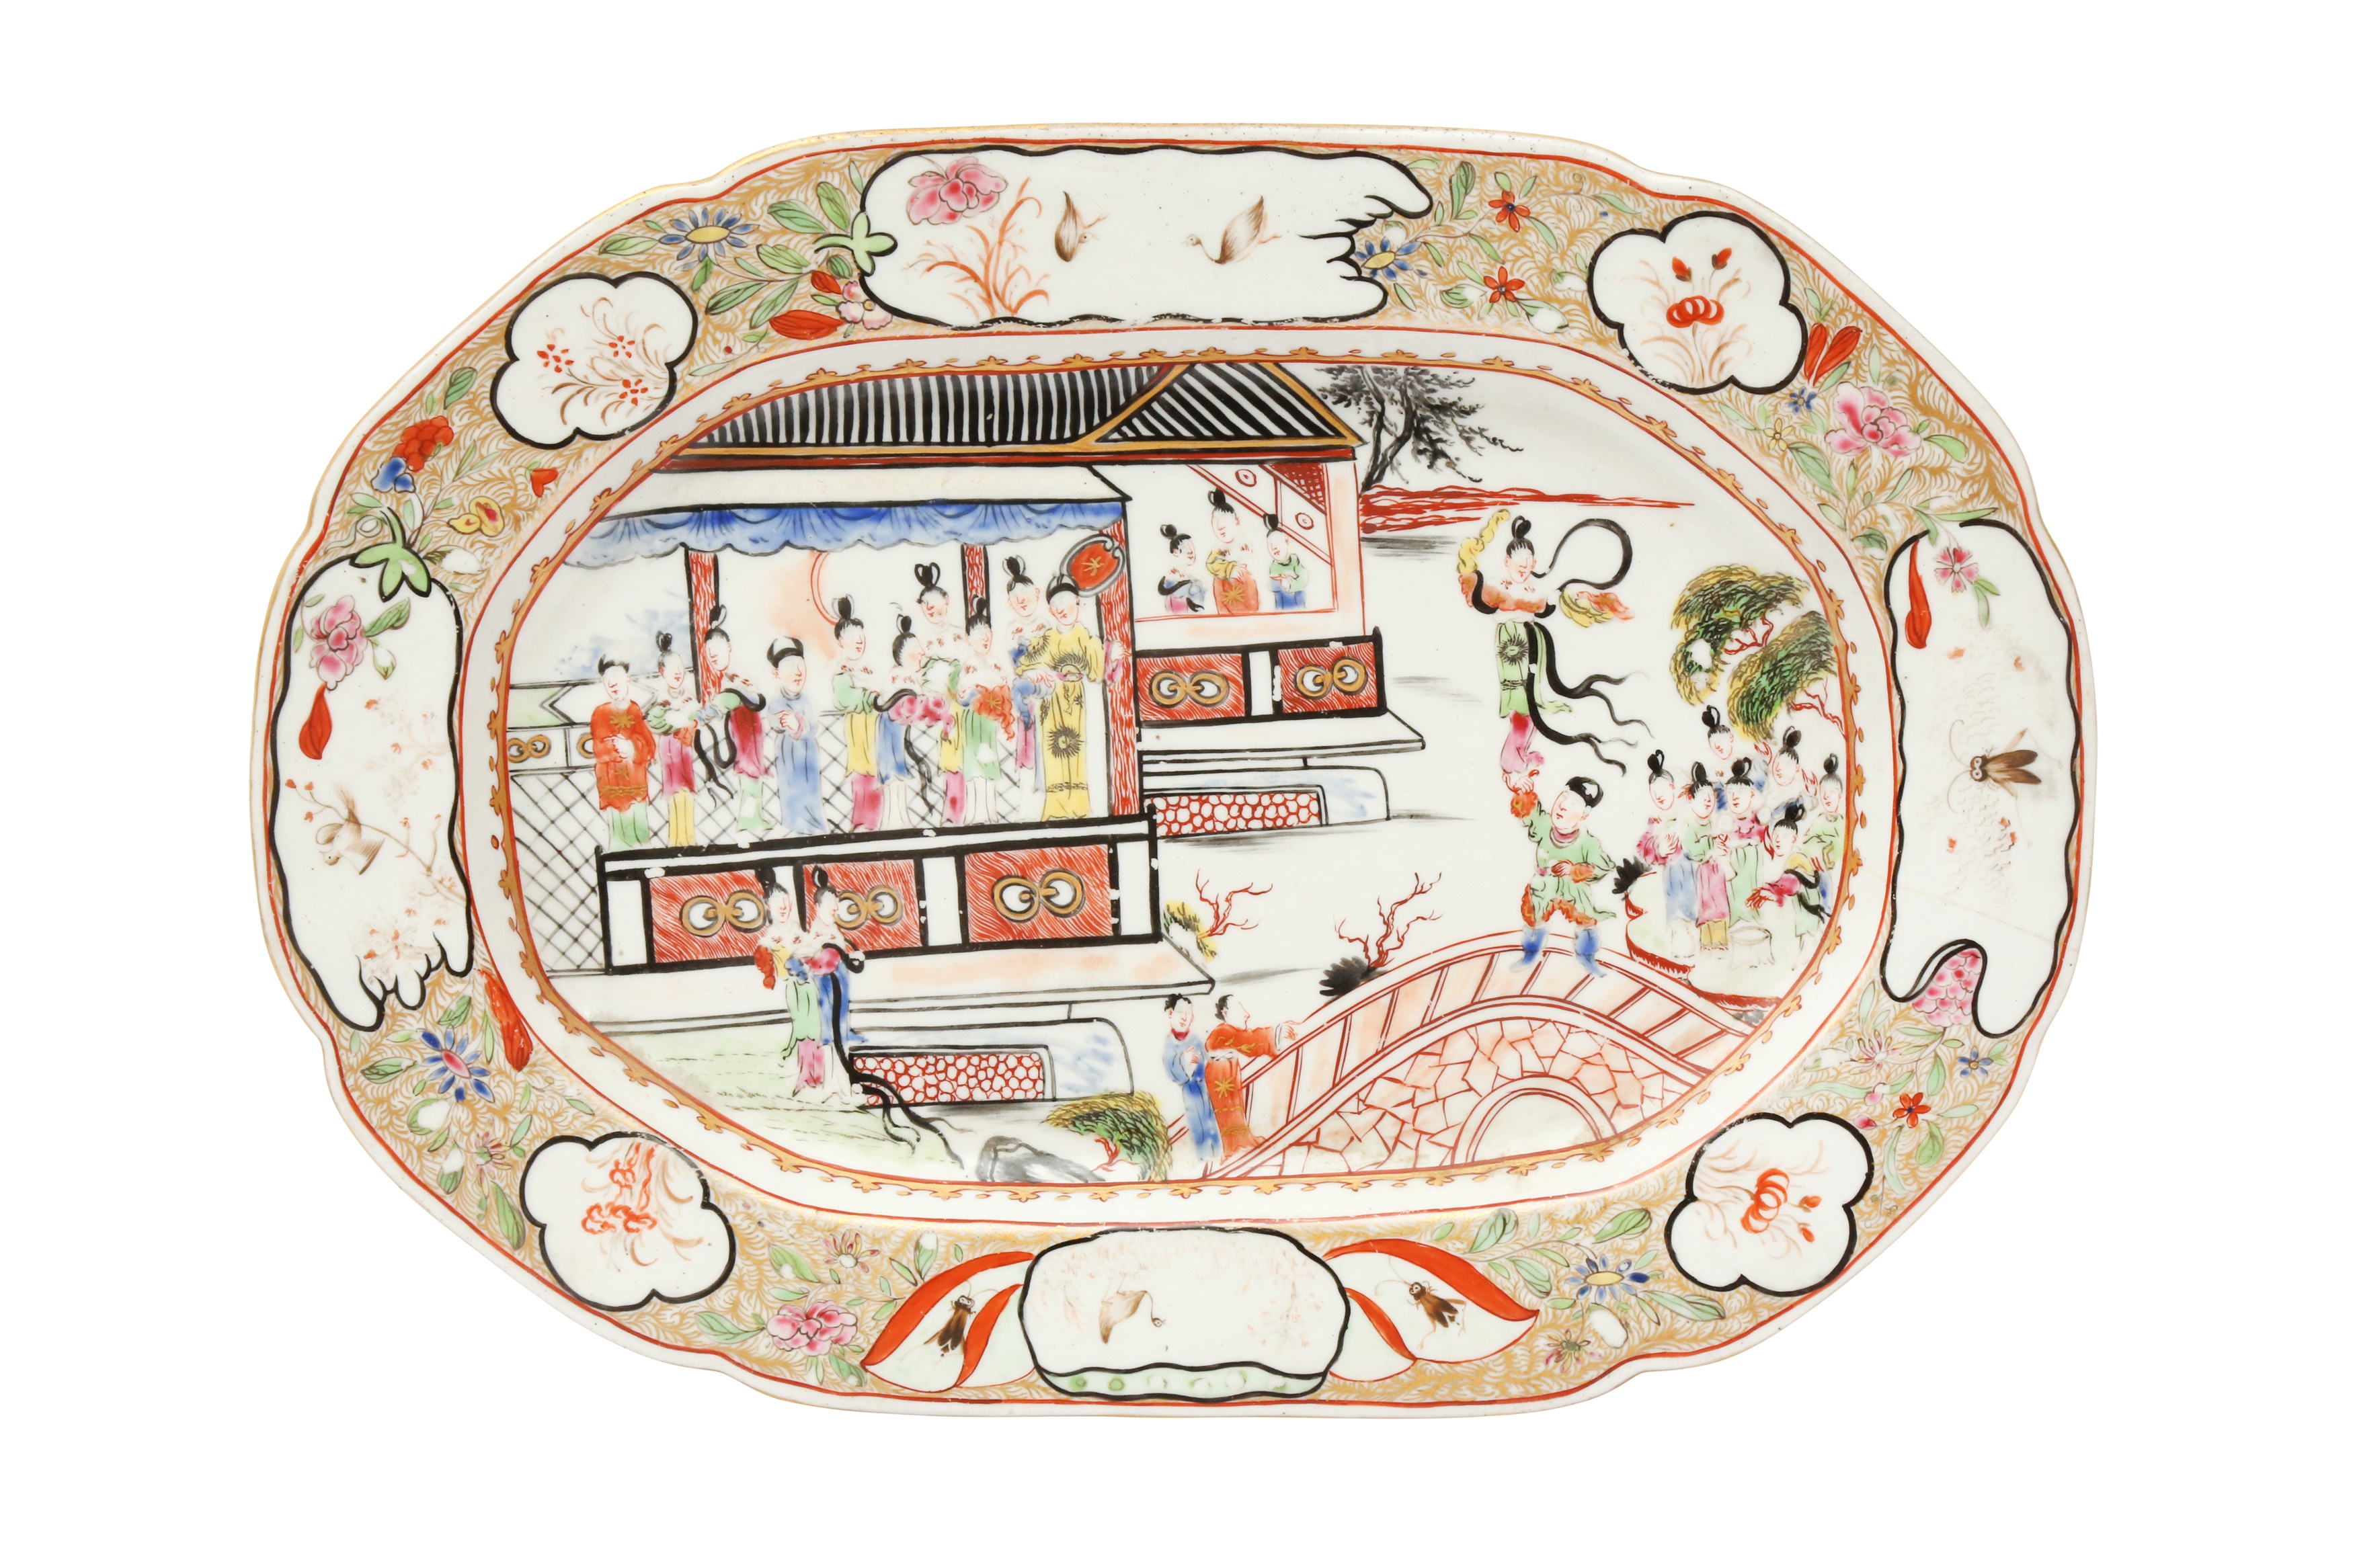 A PAIR OF CHINESE EXPORT FAMILLE-ROSE 'FIGURATIVE' DISHES 清雍正 外銷粉彩人物故事圖紋盤一對 - Image 2 of 18